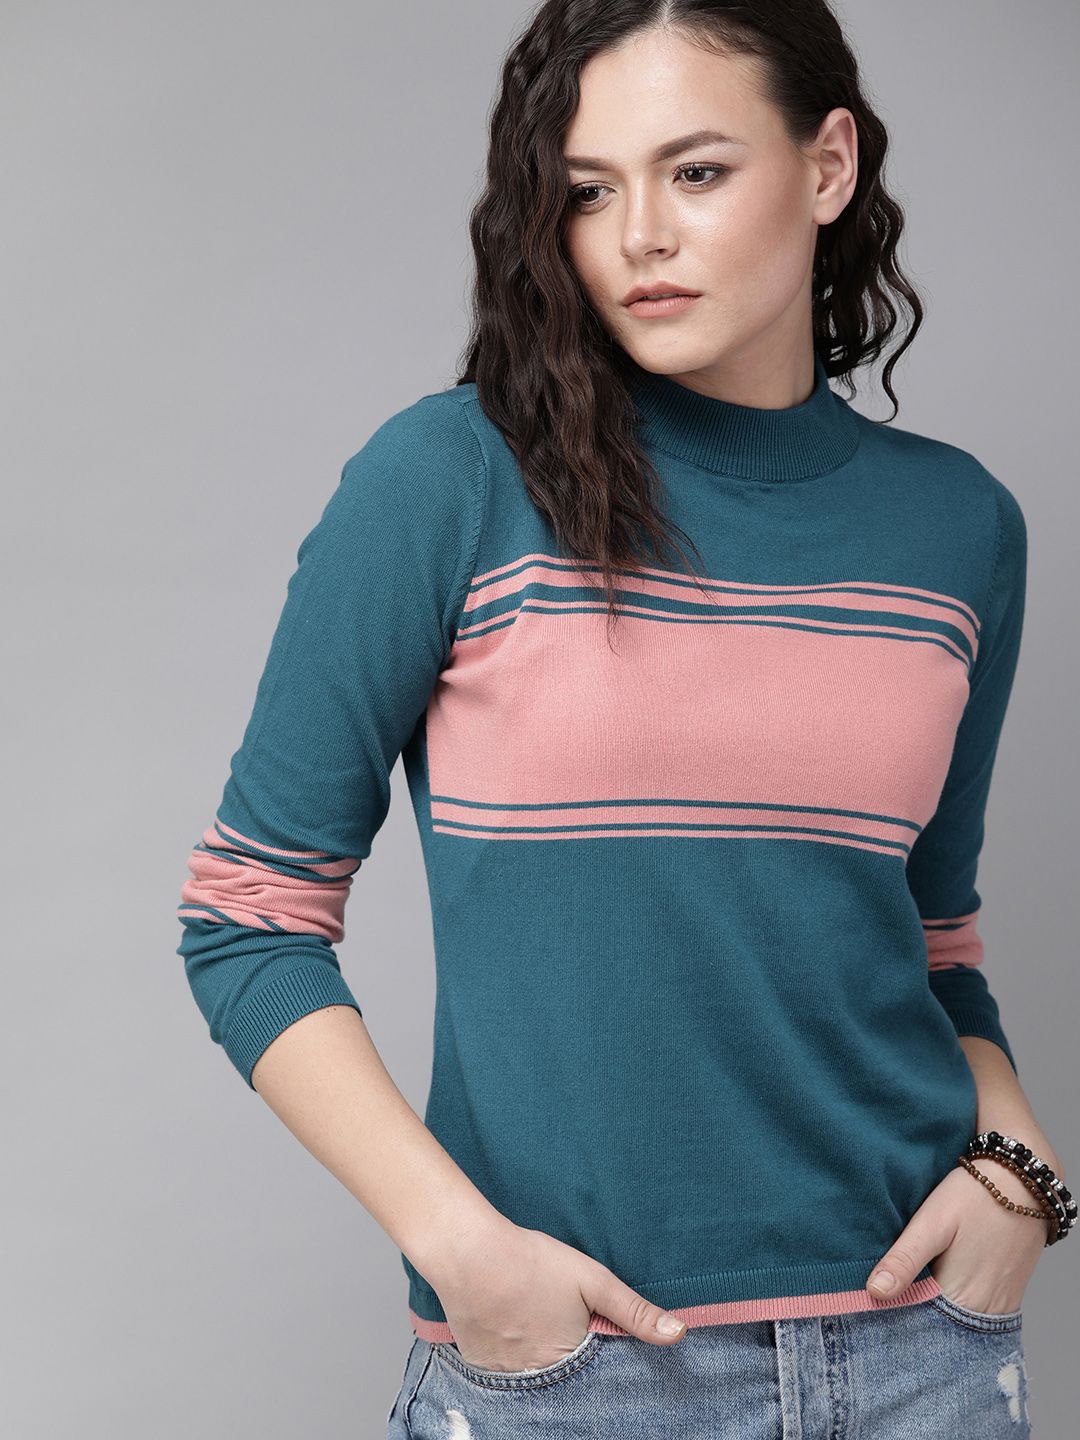 The Roadster Lifestyle Co Women Teal Blue & Pink Colourblocked Top Price in India